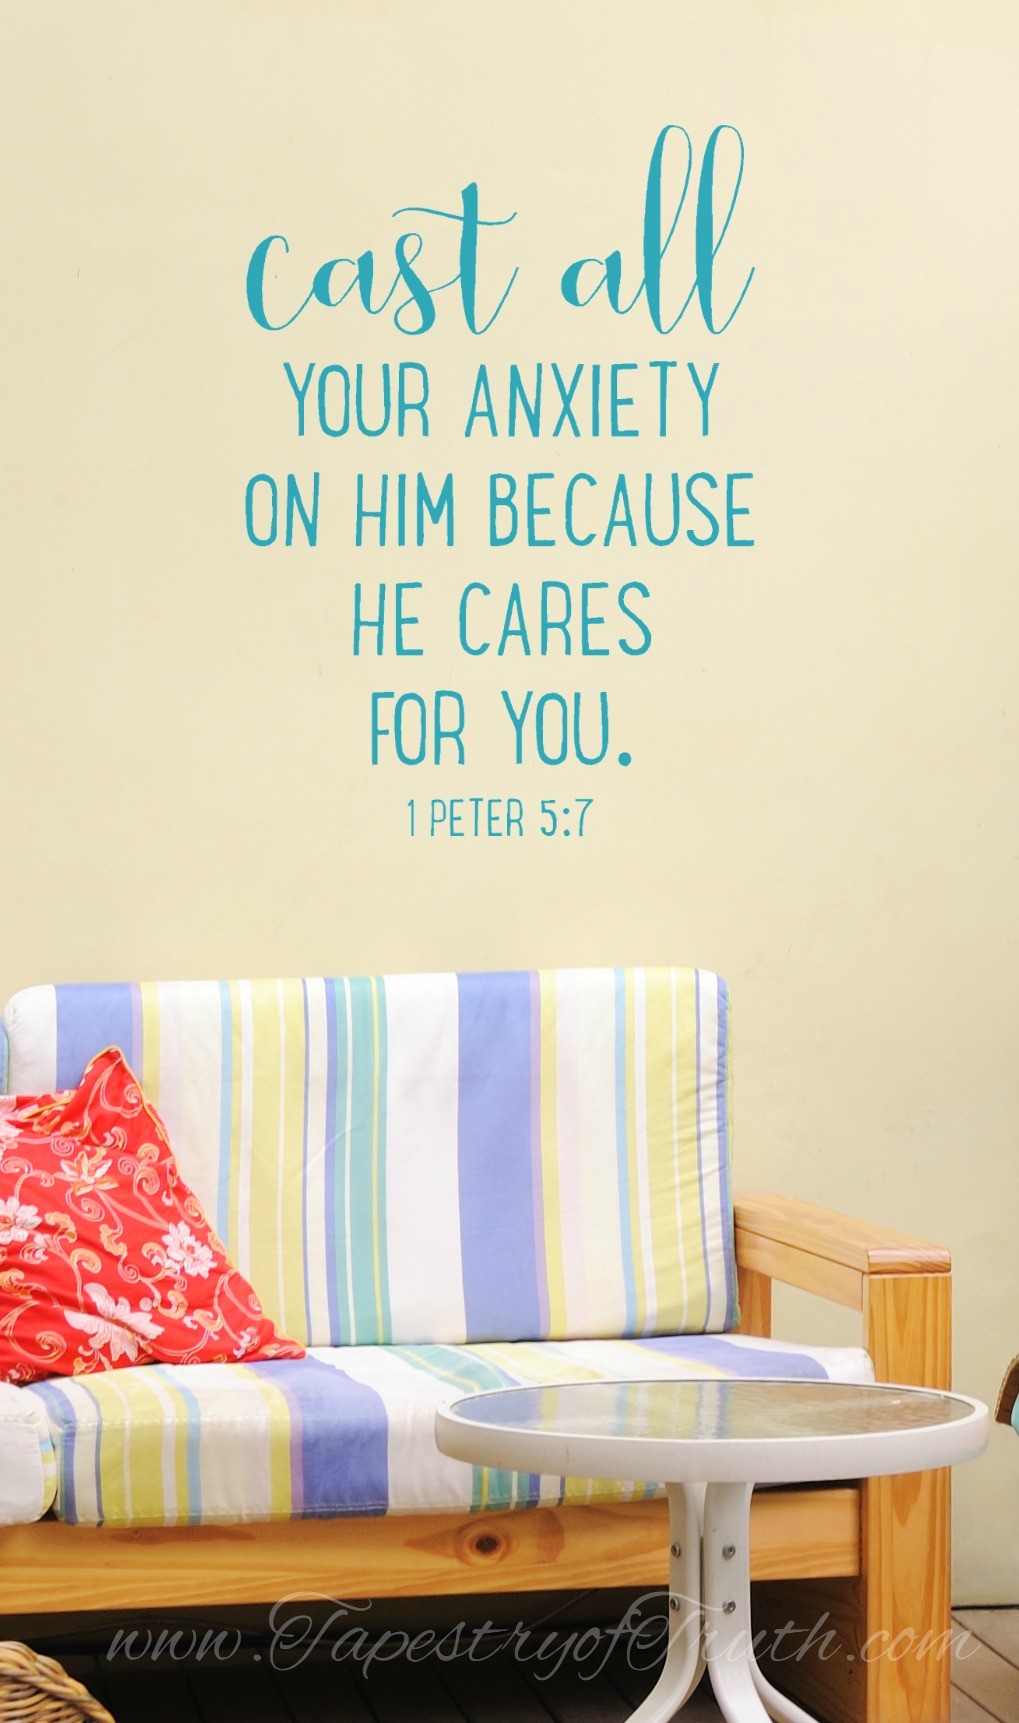 Cast all your anxiety on Him because He cares for you. 1 Peter 5:7